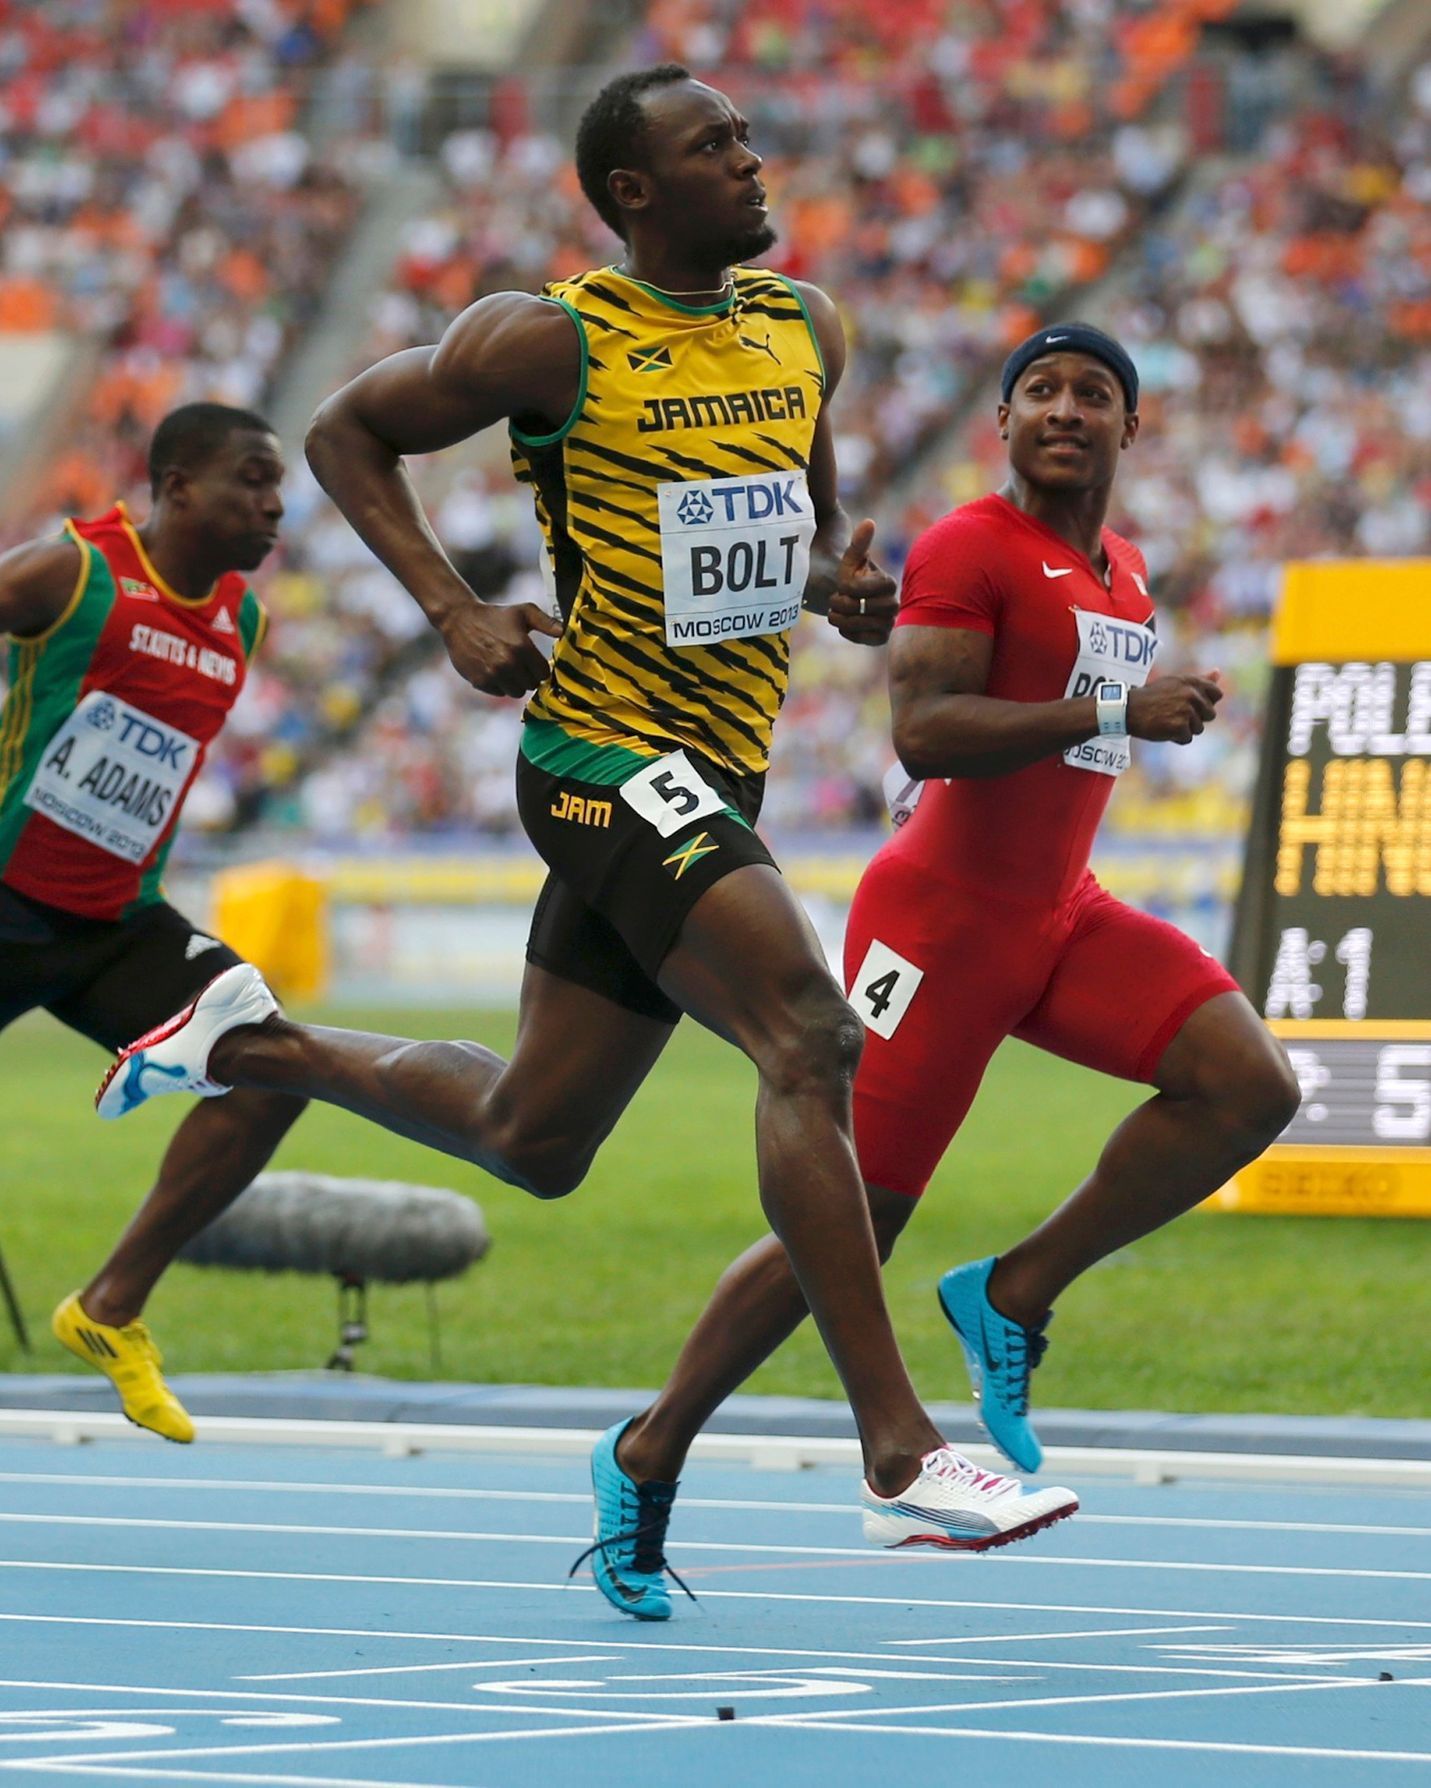 MS v atletice 2013, 100 m - semifinále: Usain Bolt a Mike Rodgers